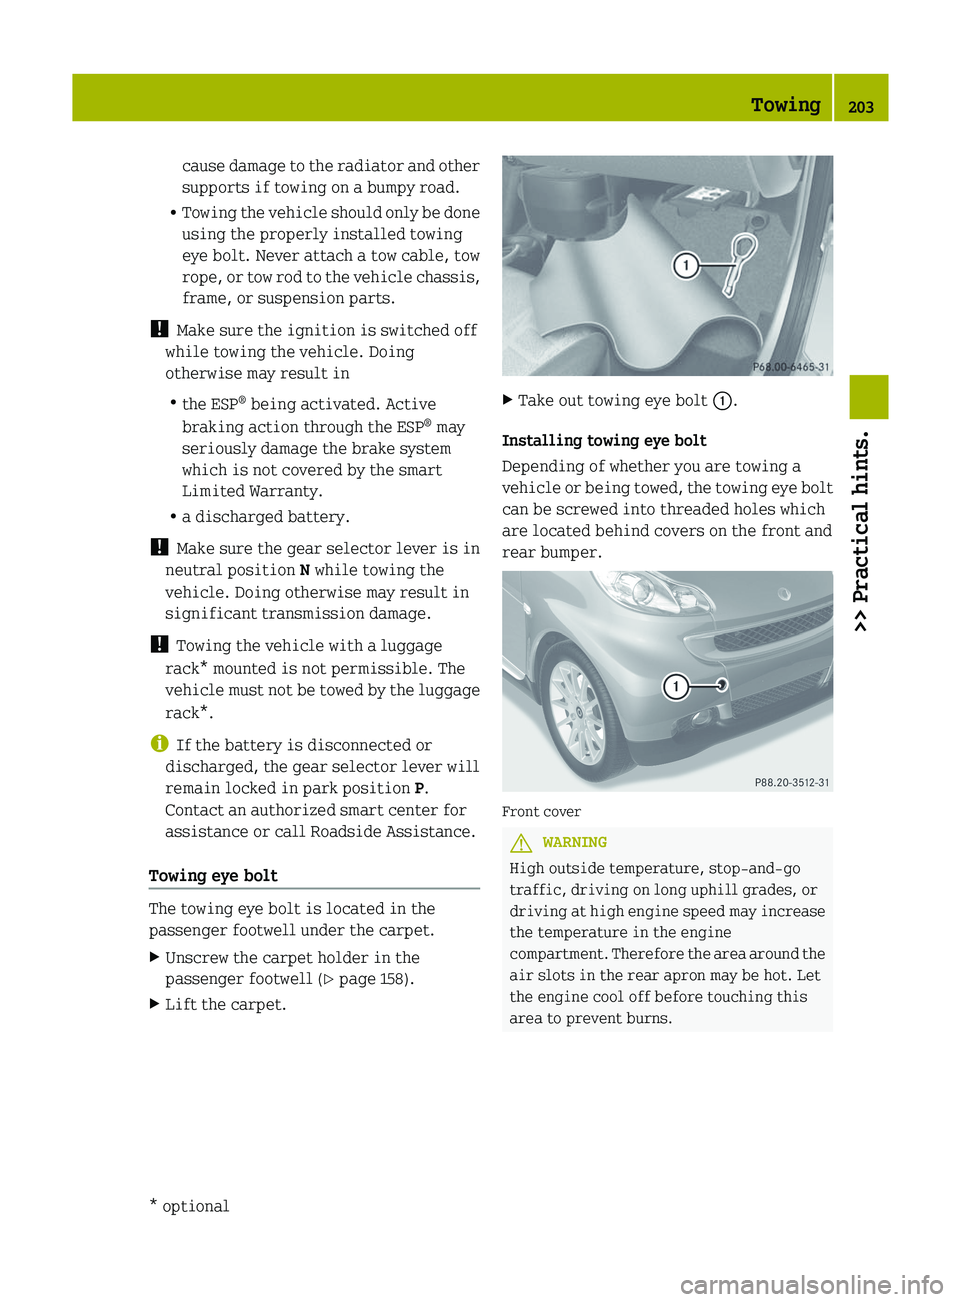 SMART FORTWO COUPE 2012  Owners Manual cause damage to the radiator and other
supports if towing on a bumpy road.
R Towing 
the vehicle should only be done
using the properly installed towing
eye bolt. Never attach a tow cable, tow
rope, o